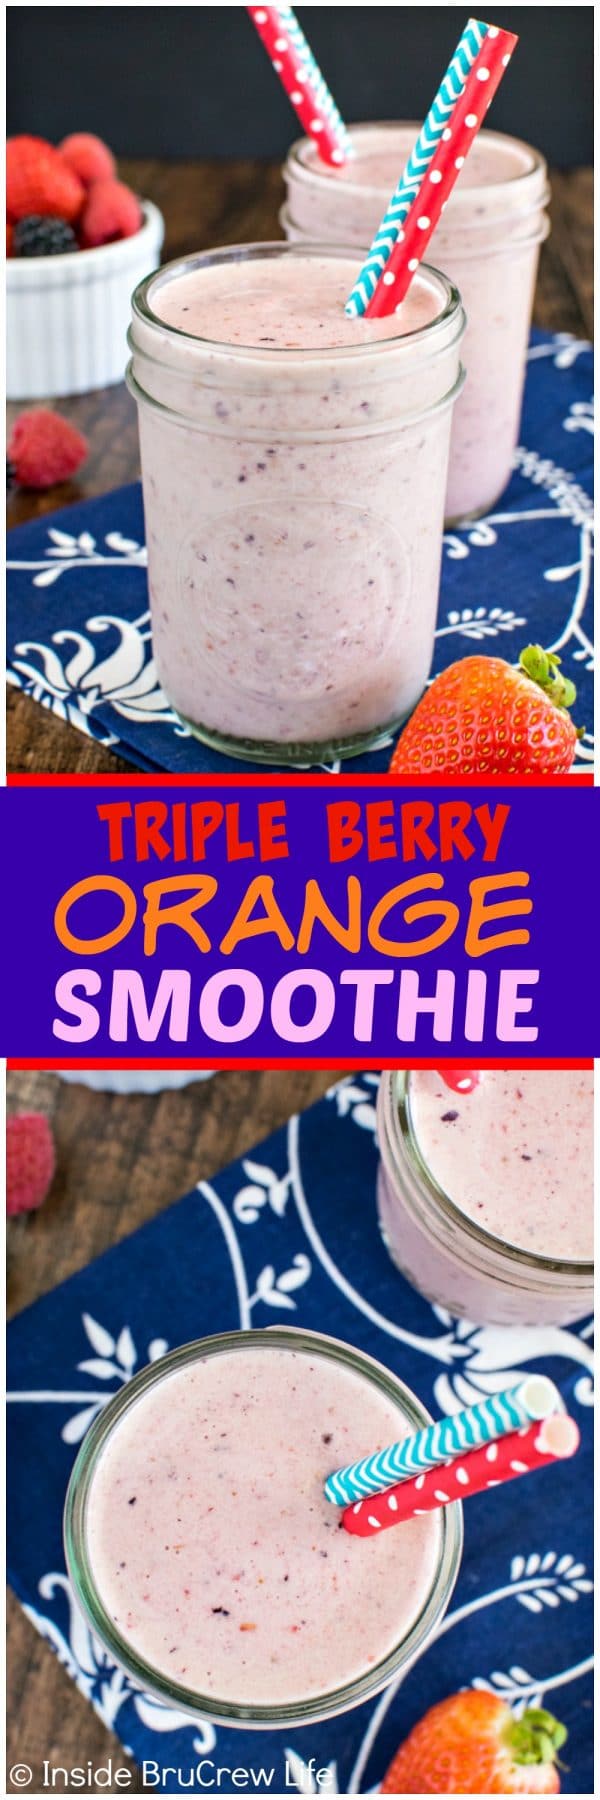 Triple Berry Orange Smoothie - three kinds of fruit, yogurt, and protein make this smoothie a healthy choice. Great for breakfast or an afternoon snack!